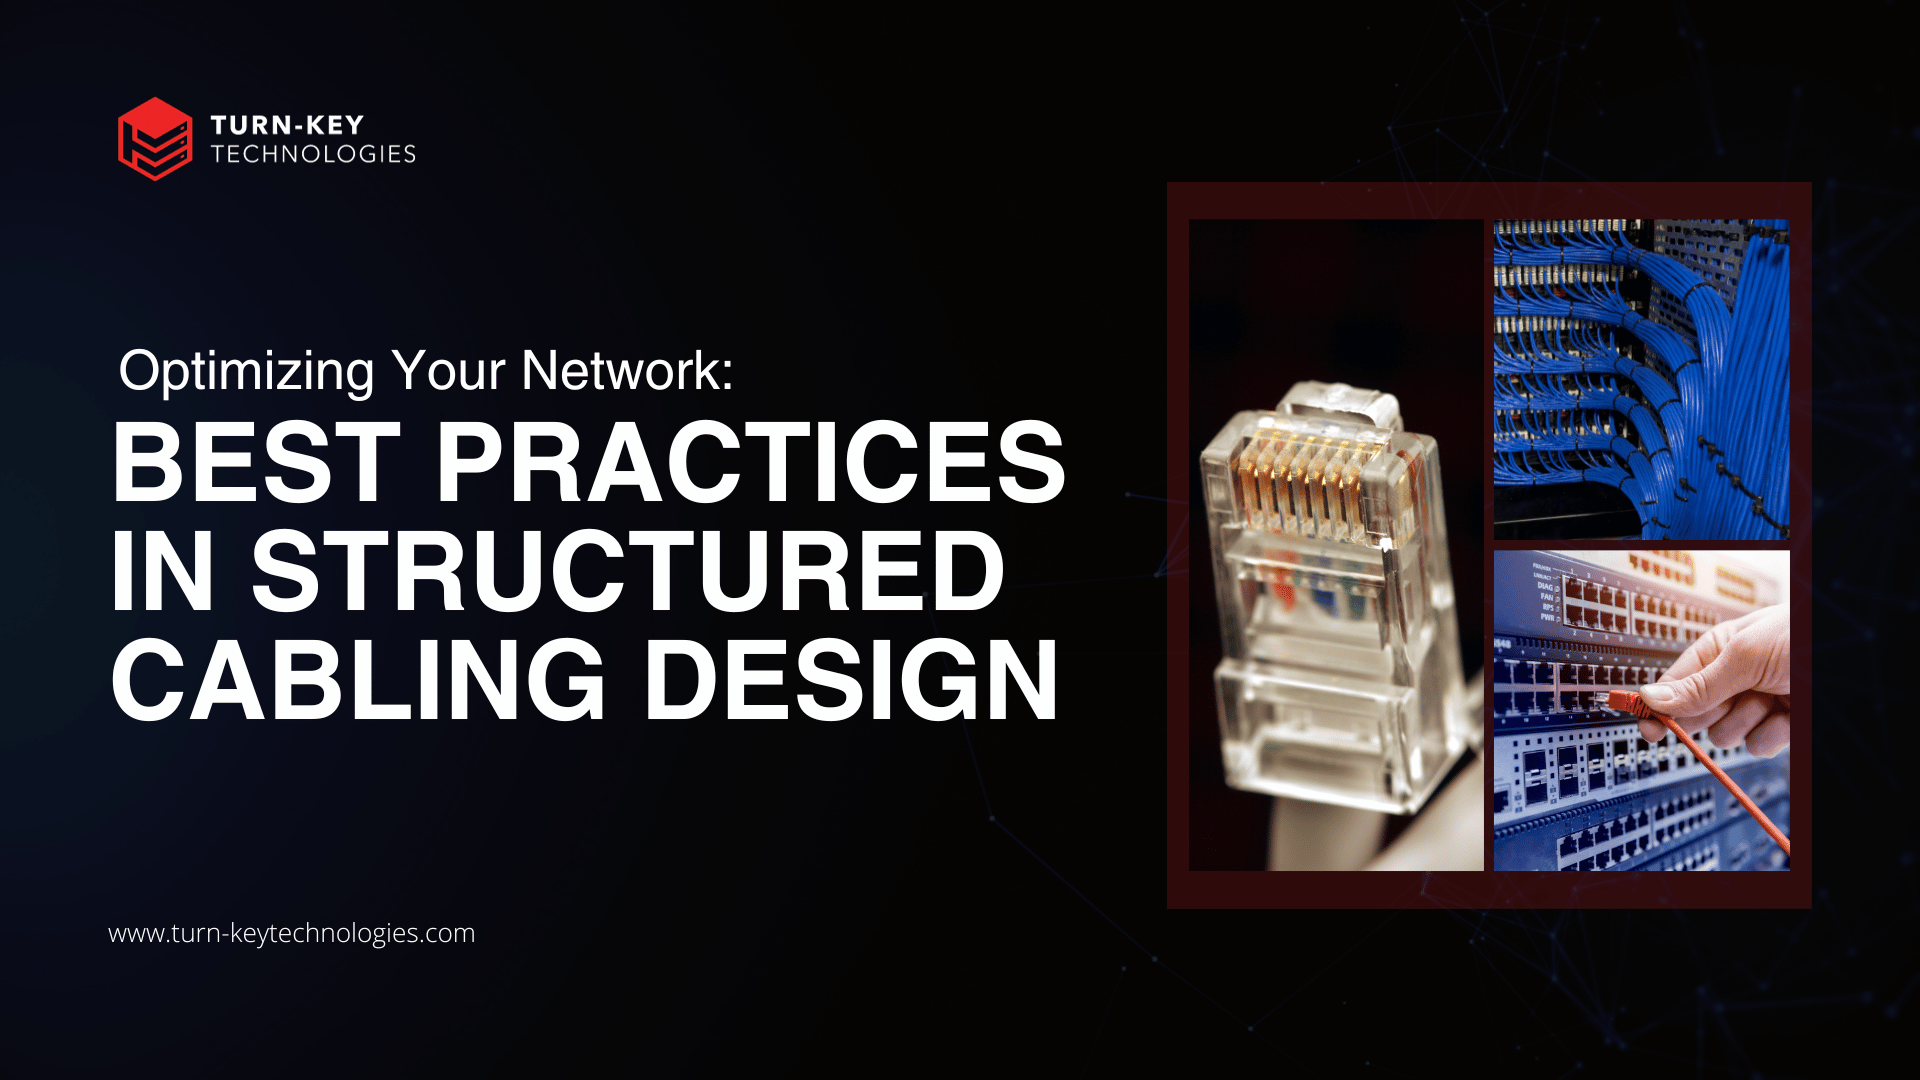 Structured Cabling Design